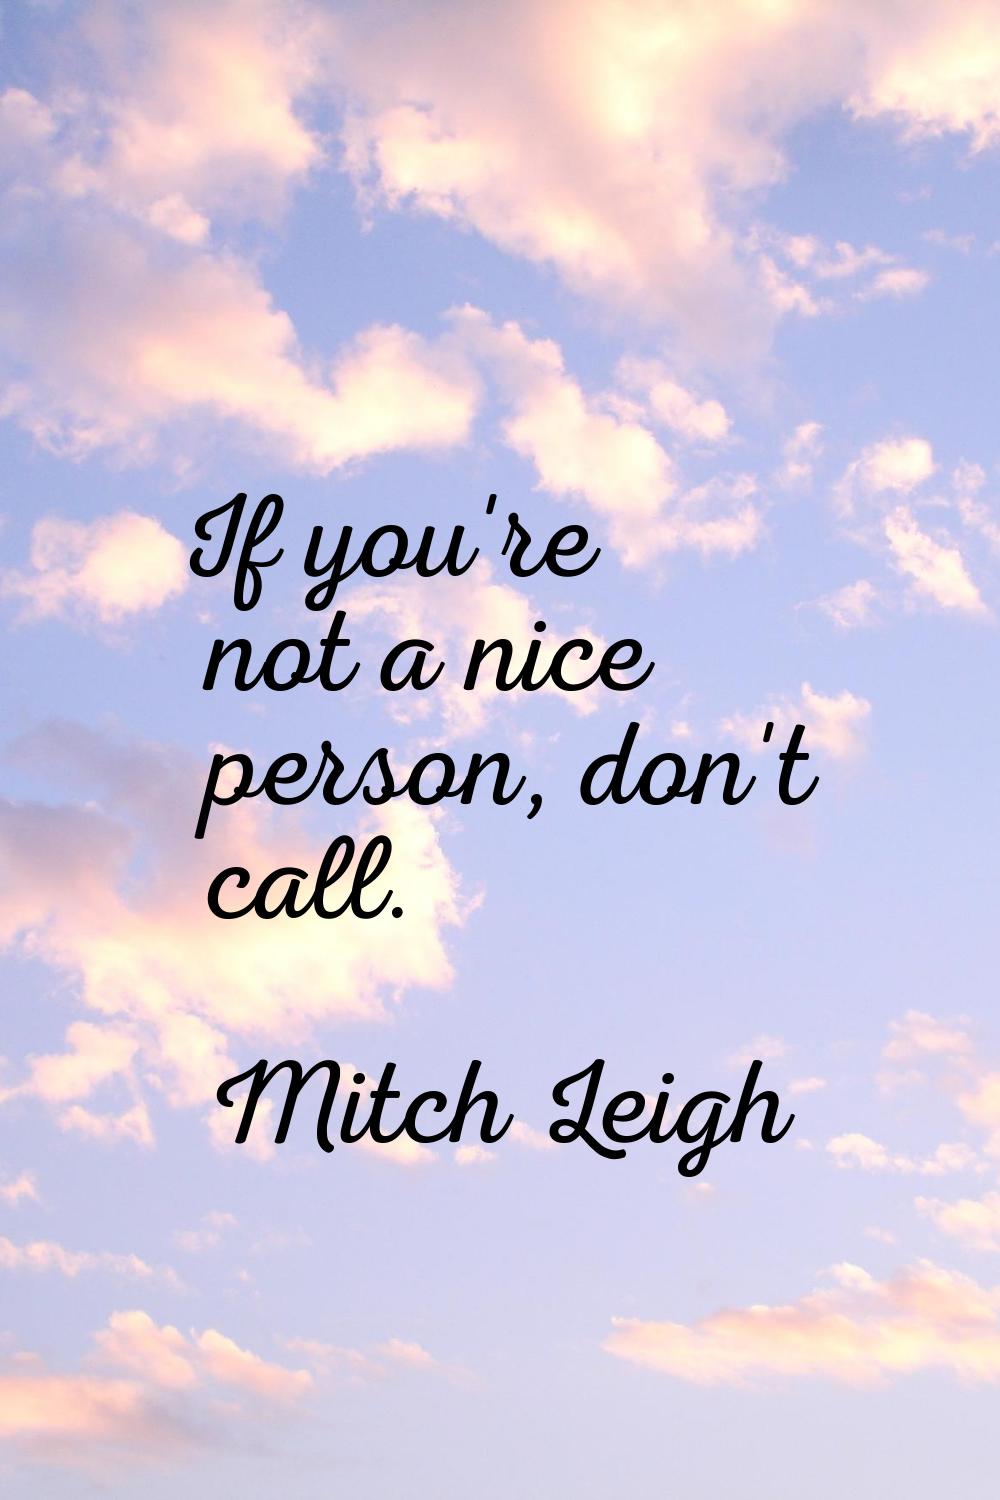 If you're not a nice person, don't call.